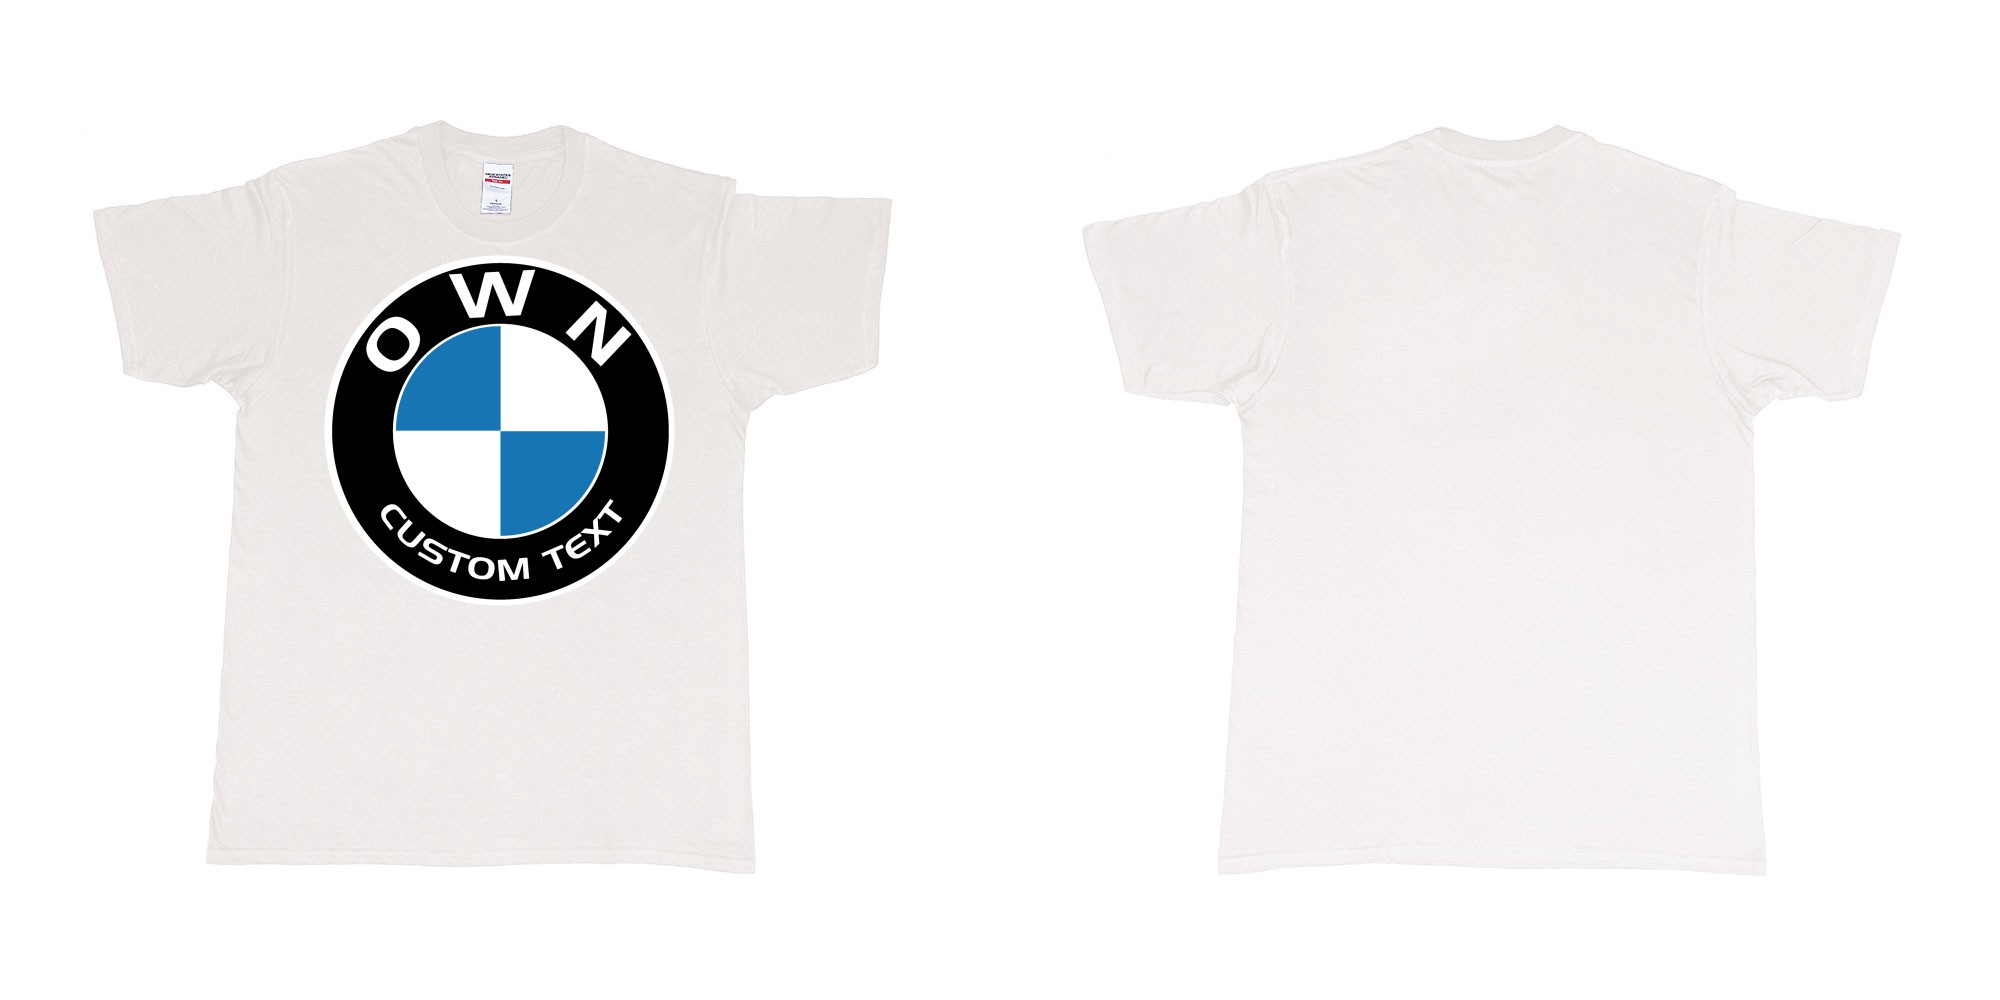 Custom tshirt design BMW logo custom text tshirt printing in fabric color white choice your own text made in Bali by The Pirate Way